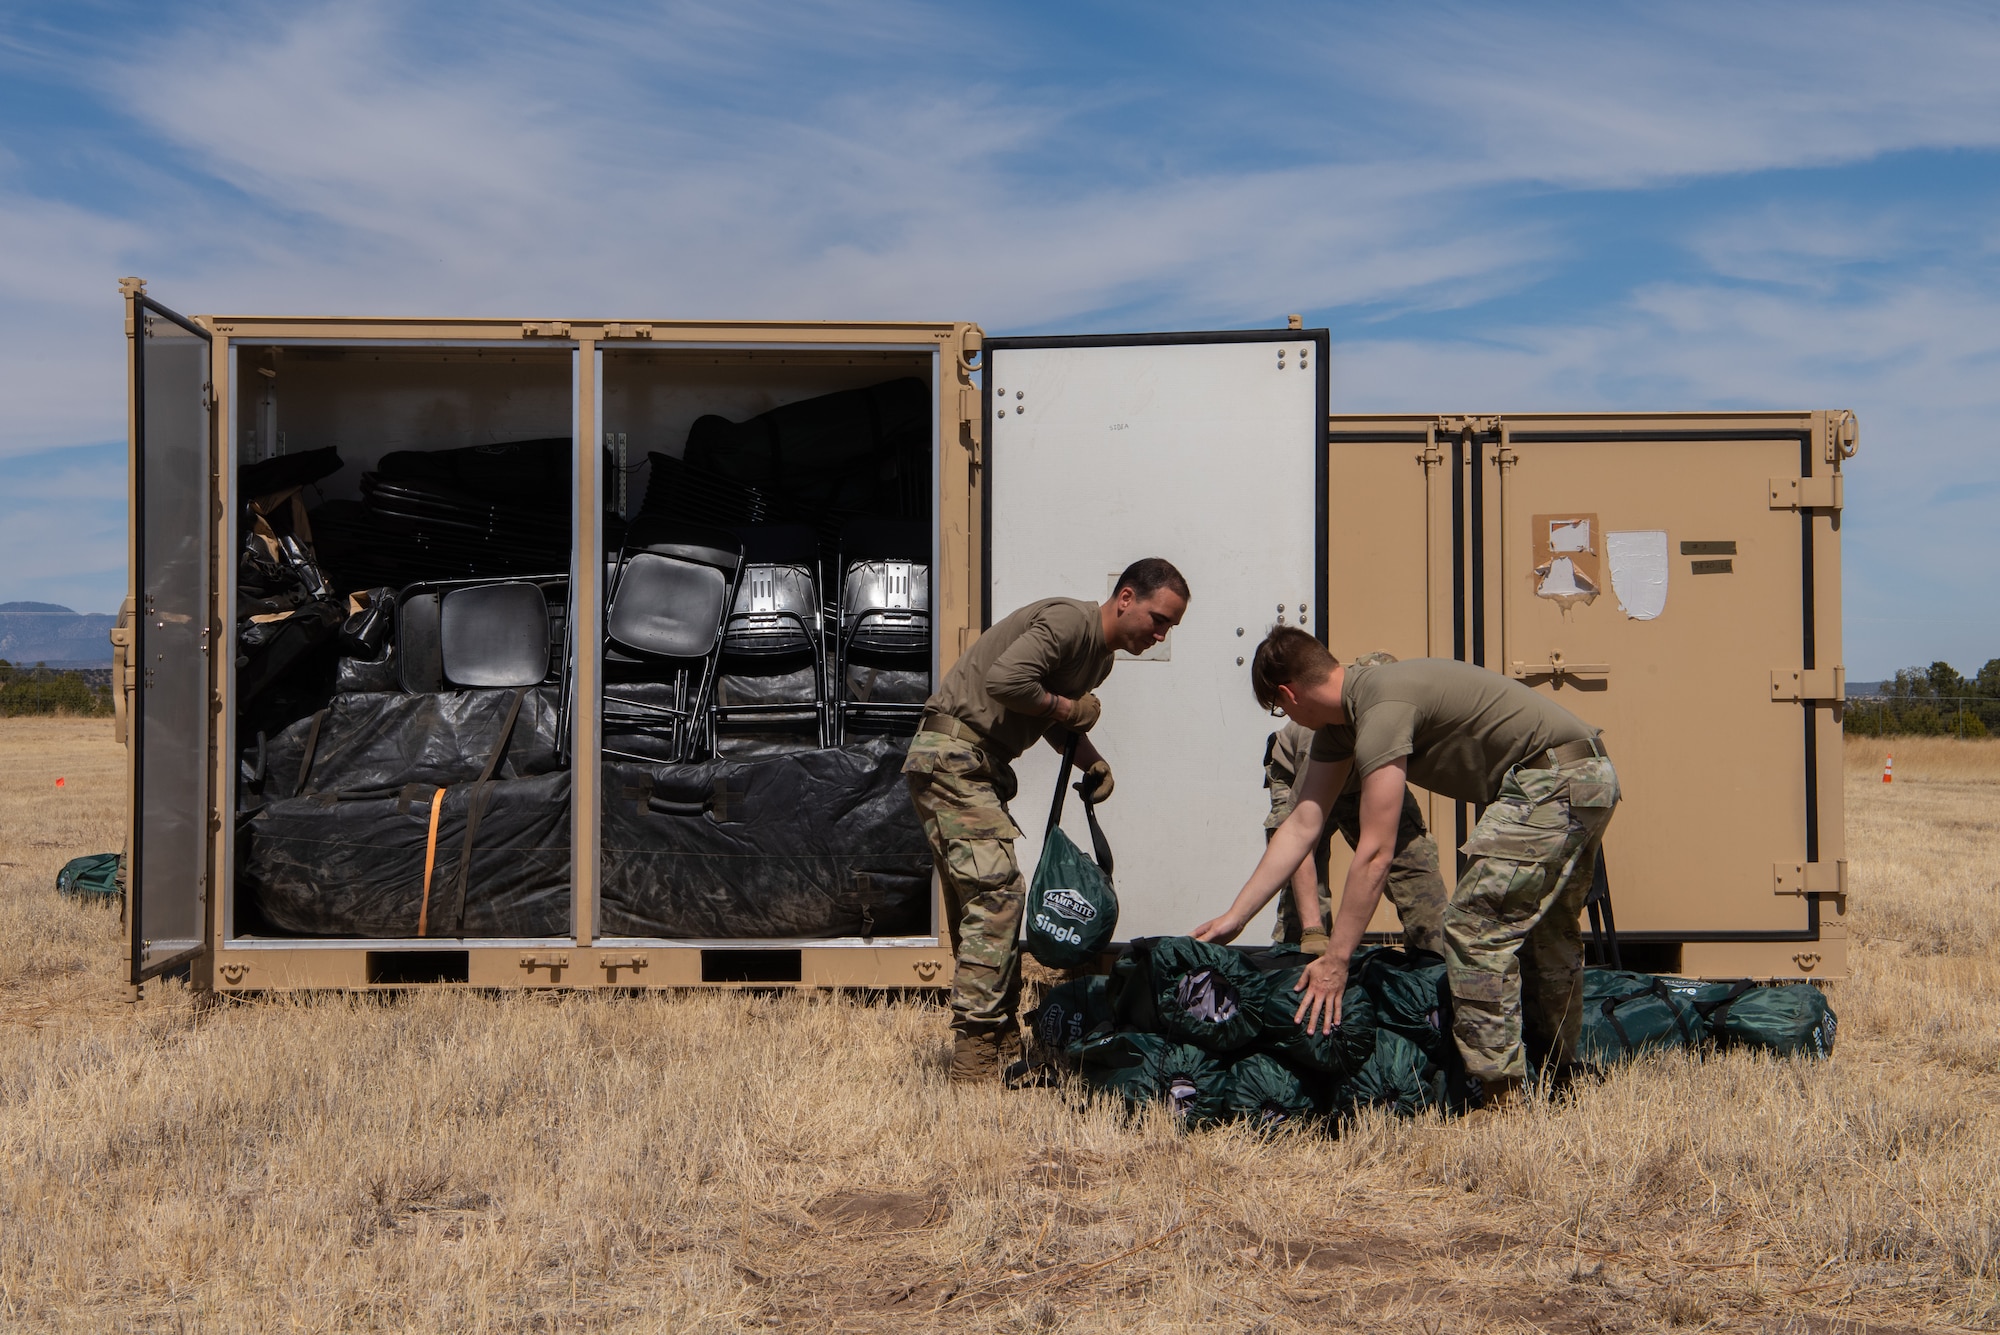 Two Air Commandos from the 27th Special Operations Mission Support Group, Detachment 1 Mission Sustainment Team 2 unload cot-sized mattress pads from a cargo container during the setup of their contingency location during the Full Mission Profile 22-3 exercise at Sierra Blanca Regional Airport, New Mexico. (U.S. Air Force photo by Airman 1st Class Alexis Sandoval)